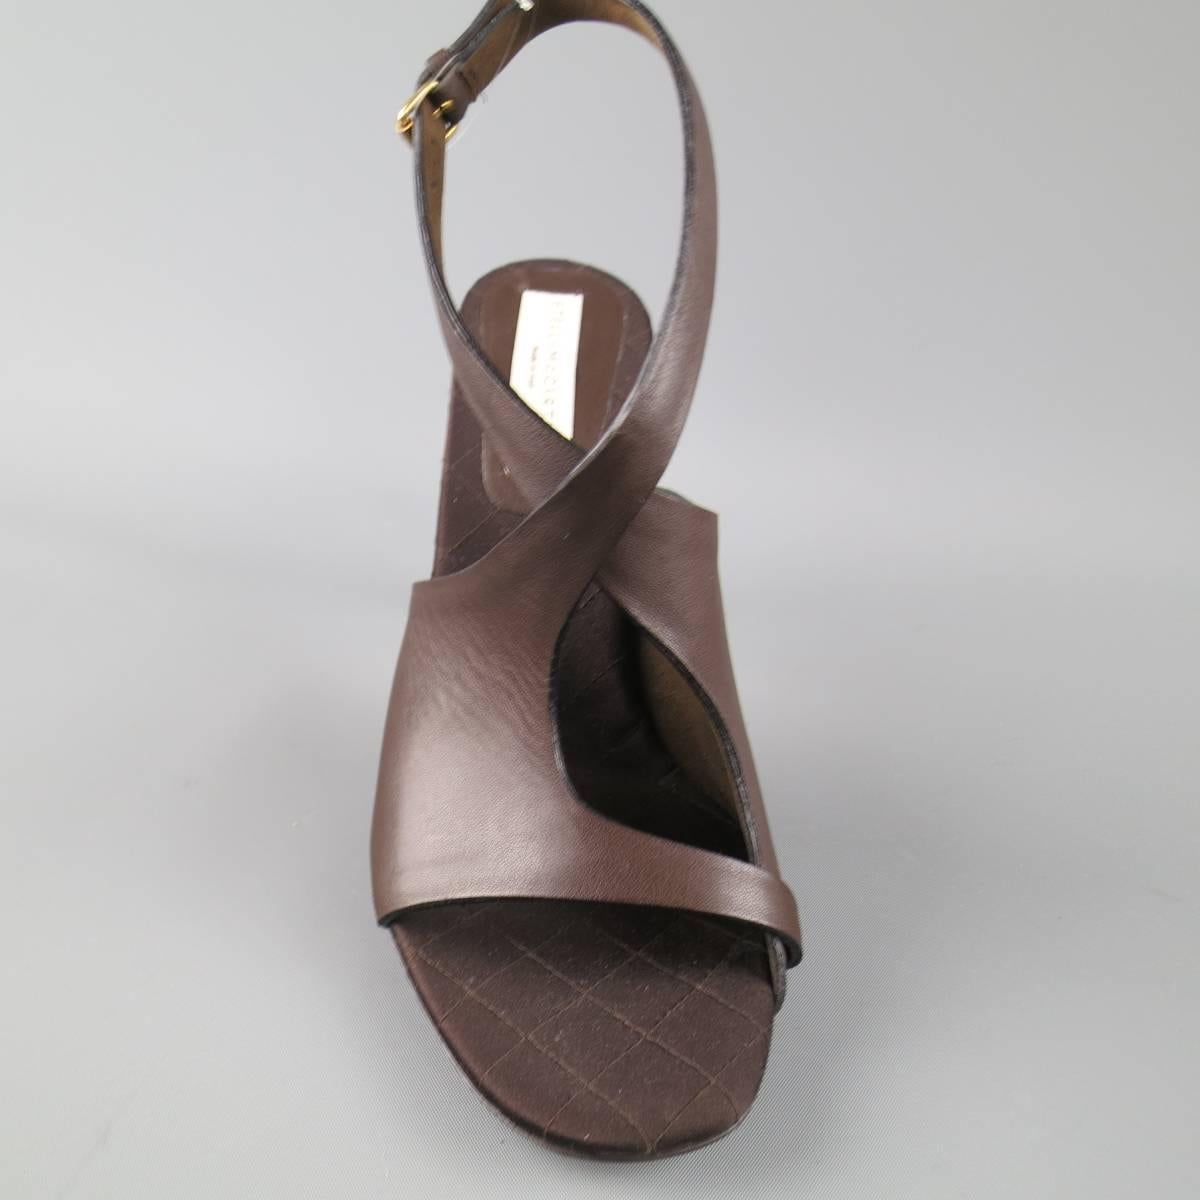 STELLA McCARTNEY sandals com in a deep chocolate brown vegan leather and feature a peep toe, thick cutout toe strap with crossed ankle straps, matte stiletto heel, and gold sole. Made in Italy.
 
Excellent Pre-Owned Condition.
Marked:IT 40.5
 
Heel: